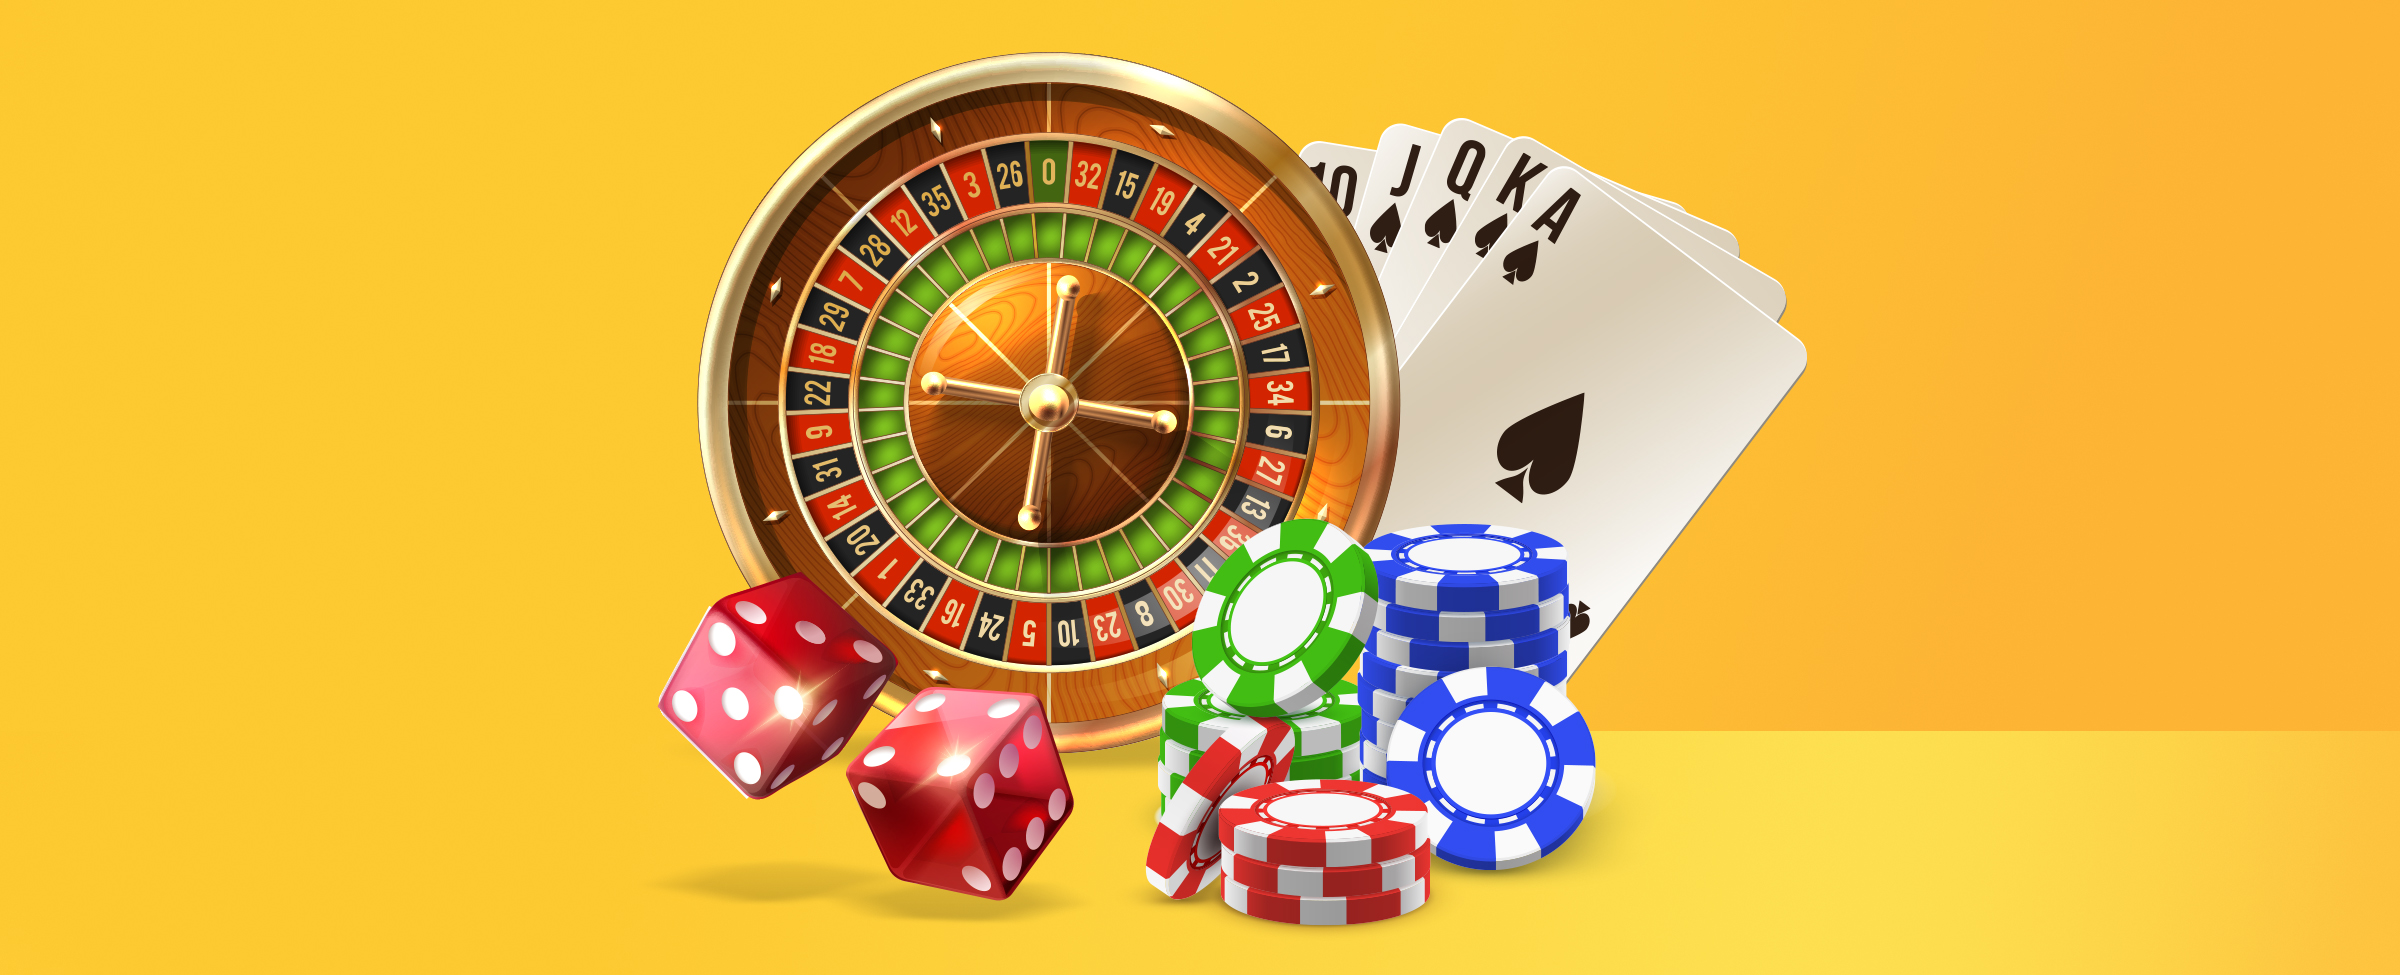 Various online casino table games and chips appear against a yellow background.